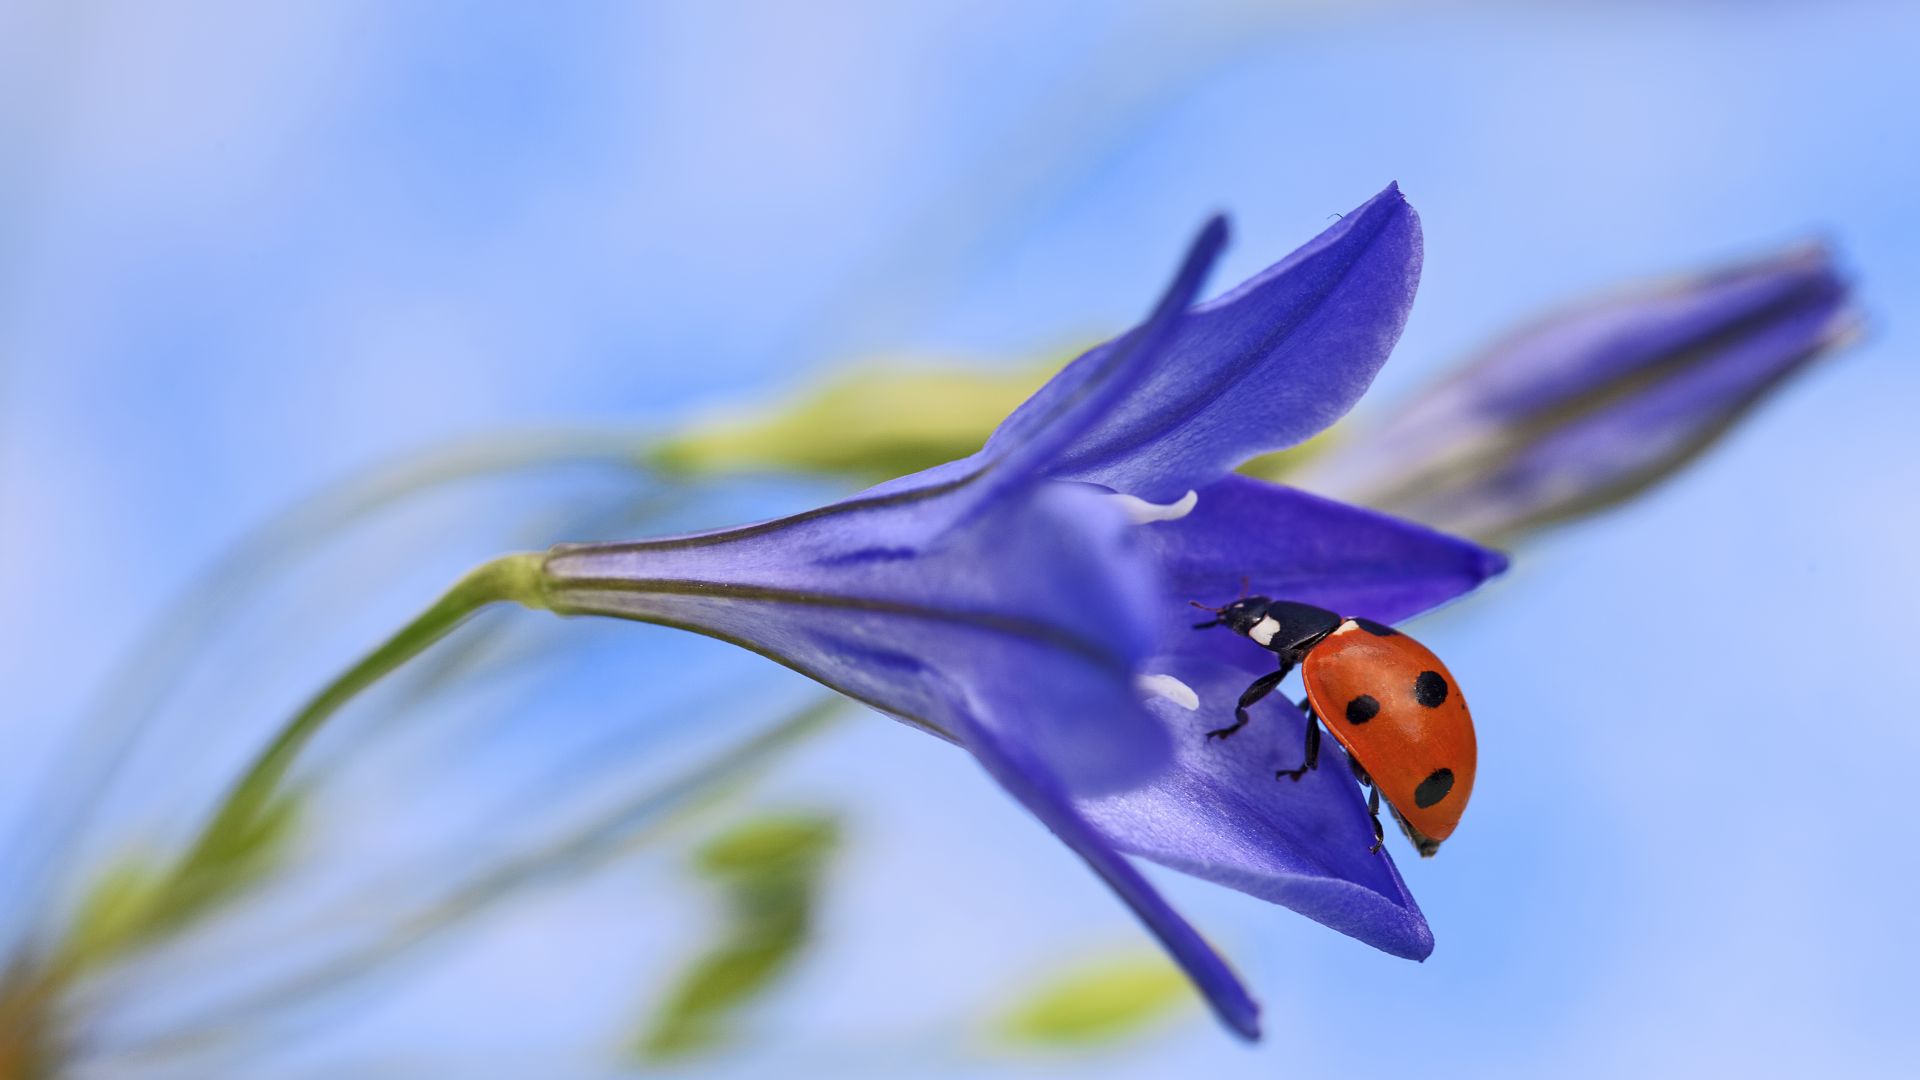 Wallpaper Ladybug, insects, purple flowers